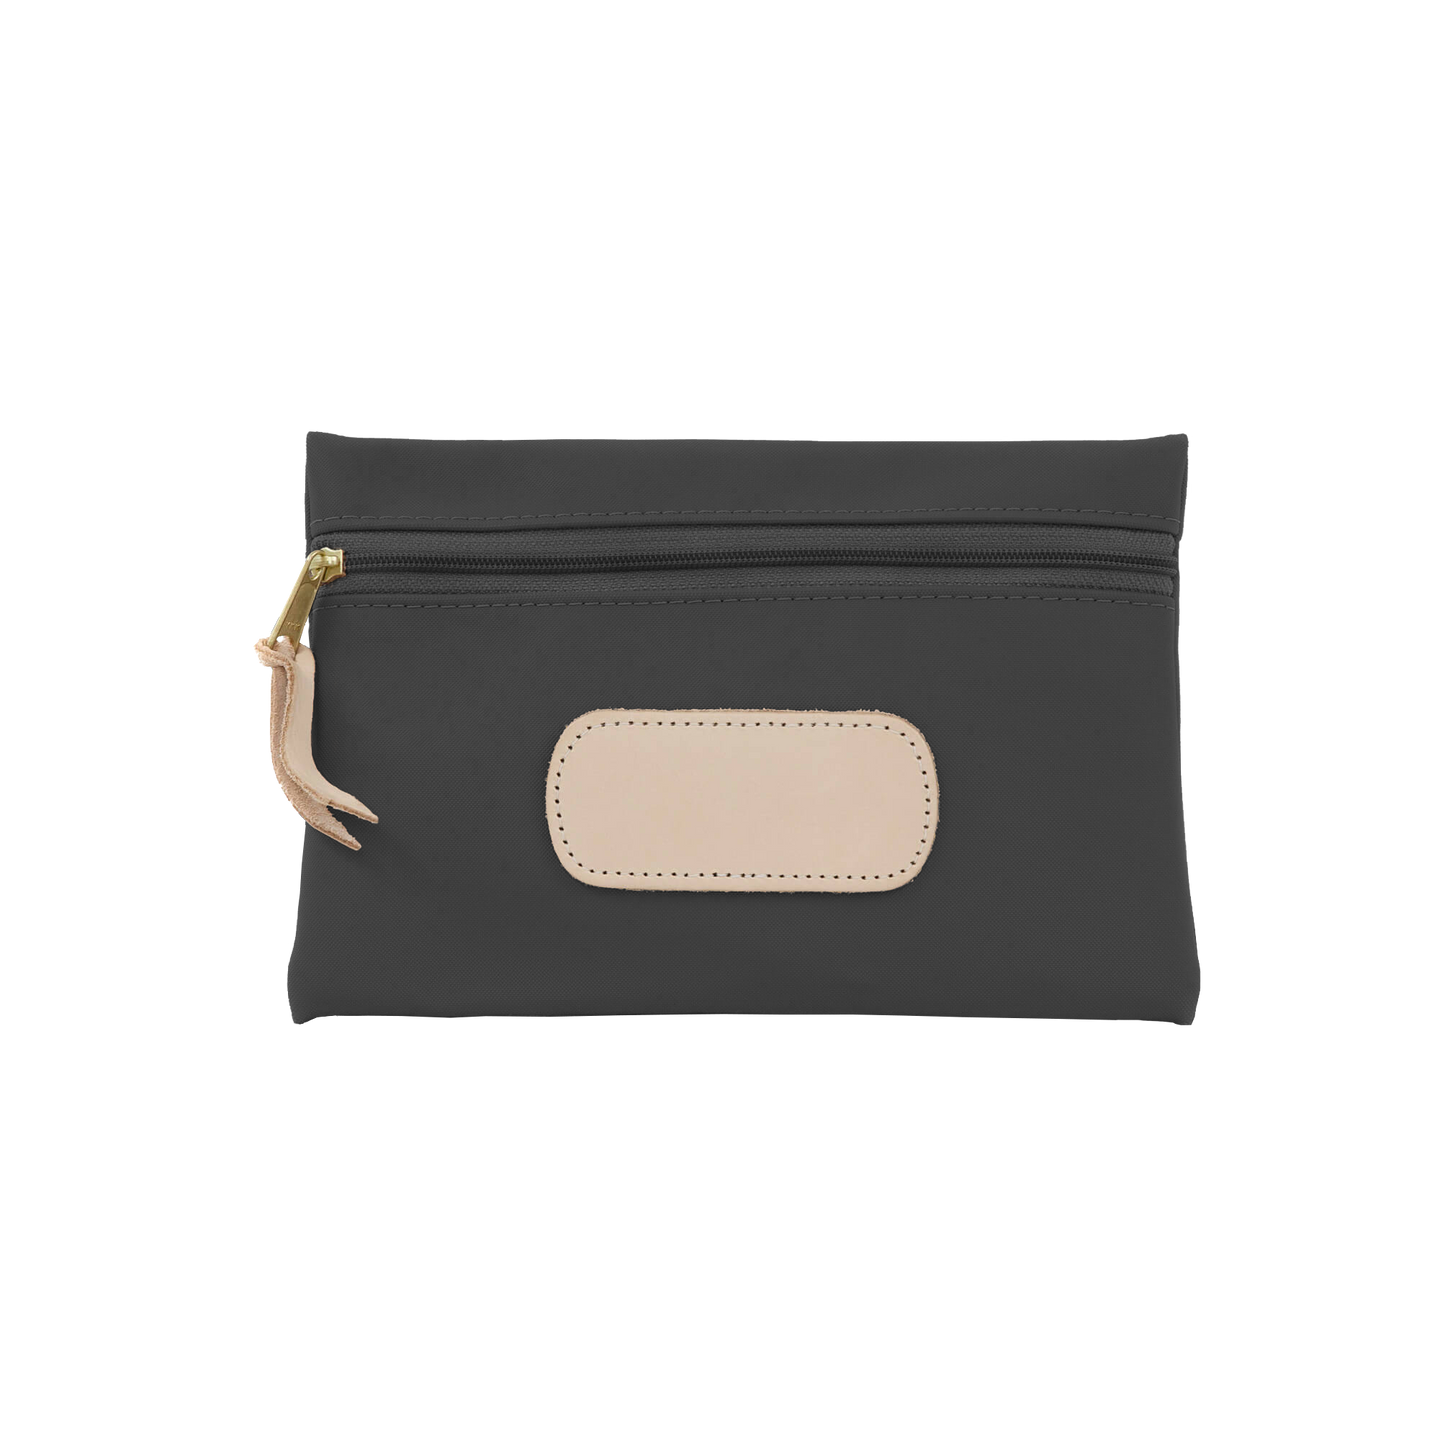 Pouch - Charcoal Coated Canvas Front Angle in Color 'Charcoal Coated Canvas'